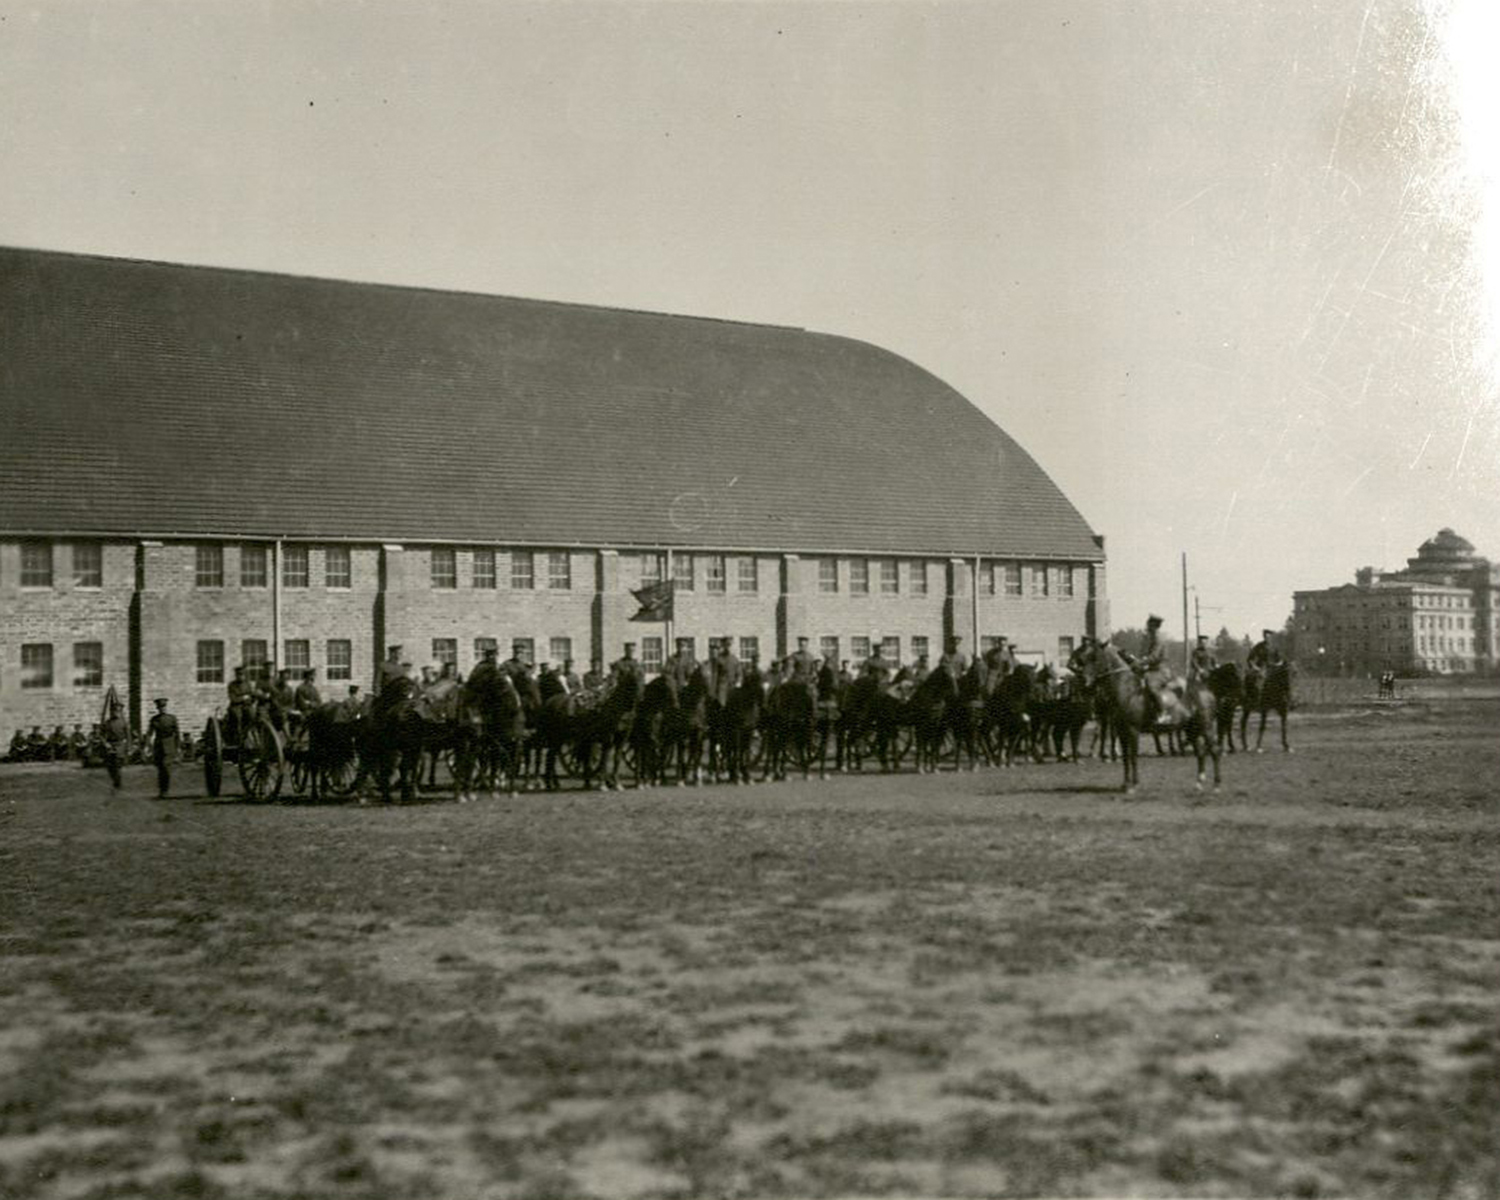 Horses lined up outside armory